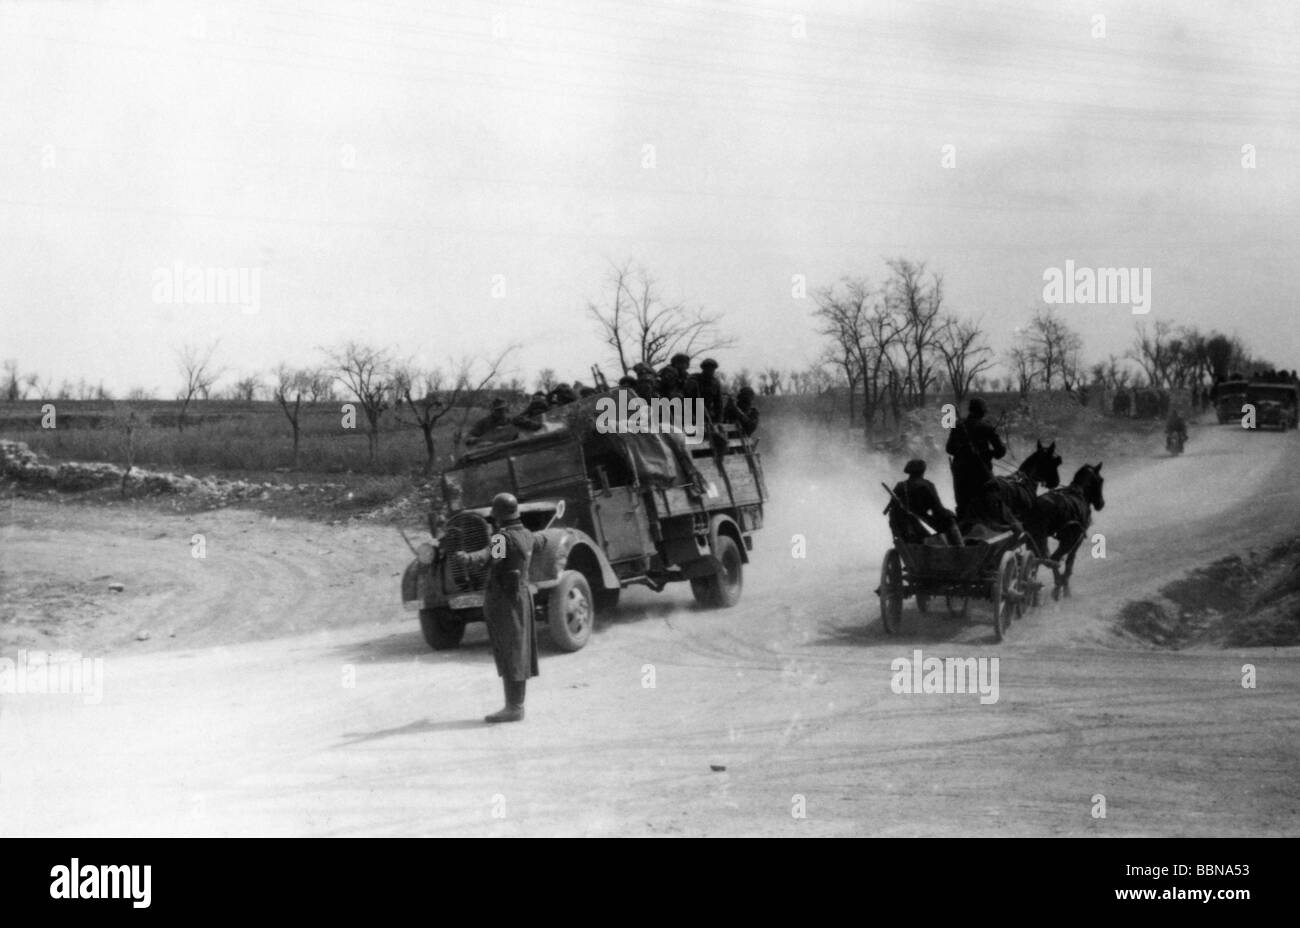 events, Second World War / WWII, Russia 1944 / 1945, Crimea, German soldier regulating the traffic on a crossroad near Sevastopol, April 1944, vehicle, vehicles, 20th century, historic, historical, Eastern Front, USSR, Soviet Union, road, lorry, horse and cart, Wehrmacht, Third Reich, military, 1940s, people, Stock Photo